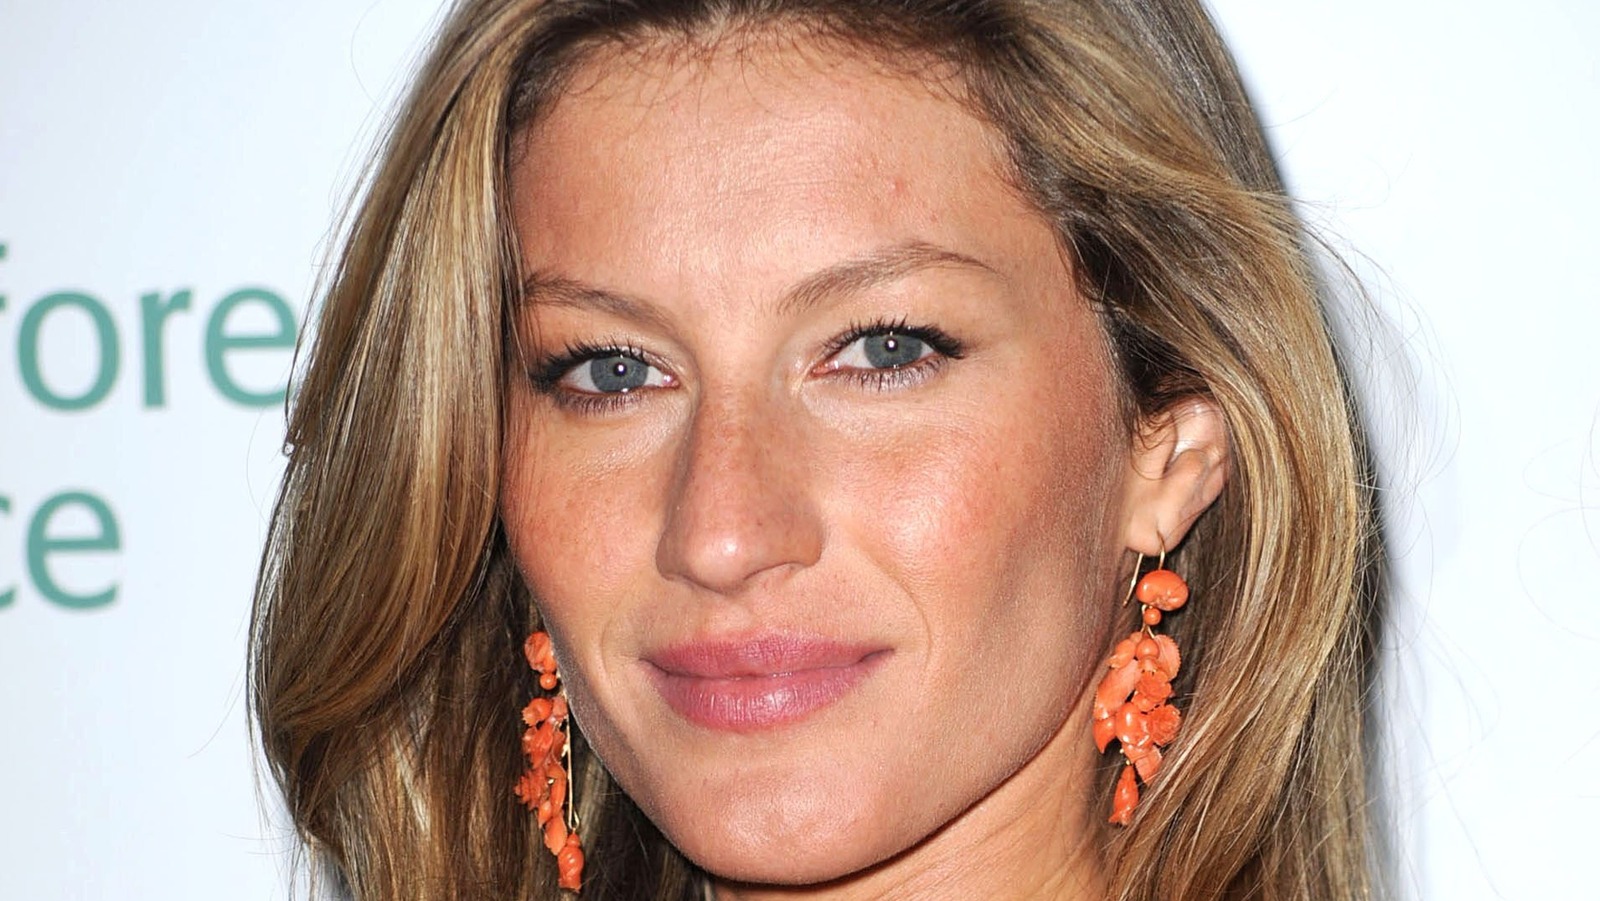 The Professional Sport Gisele Bündchen Wanted To Play.